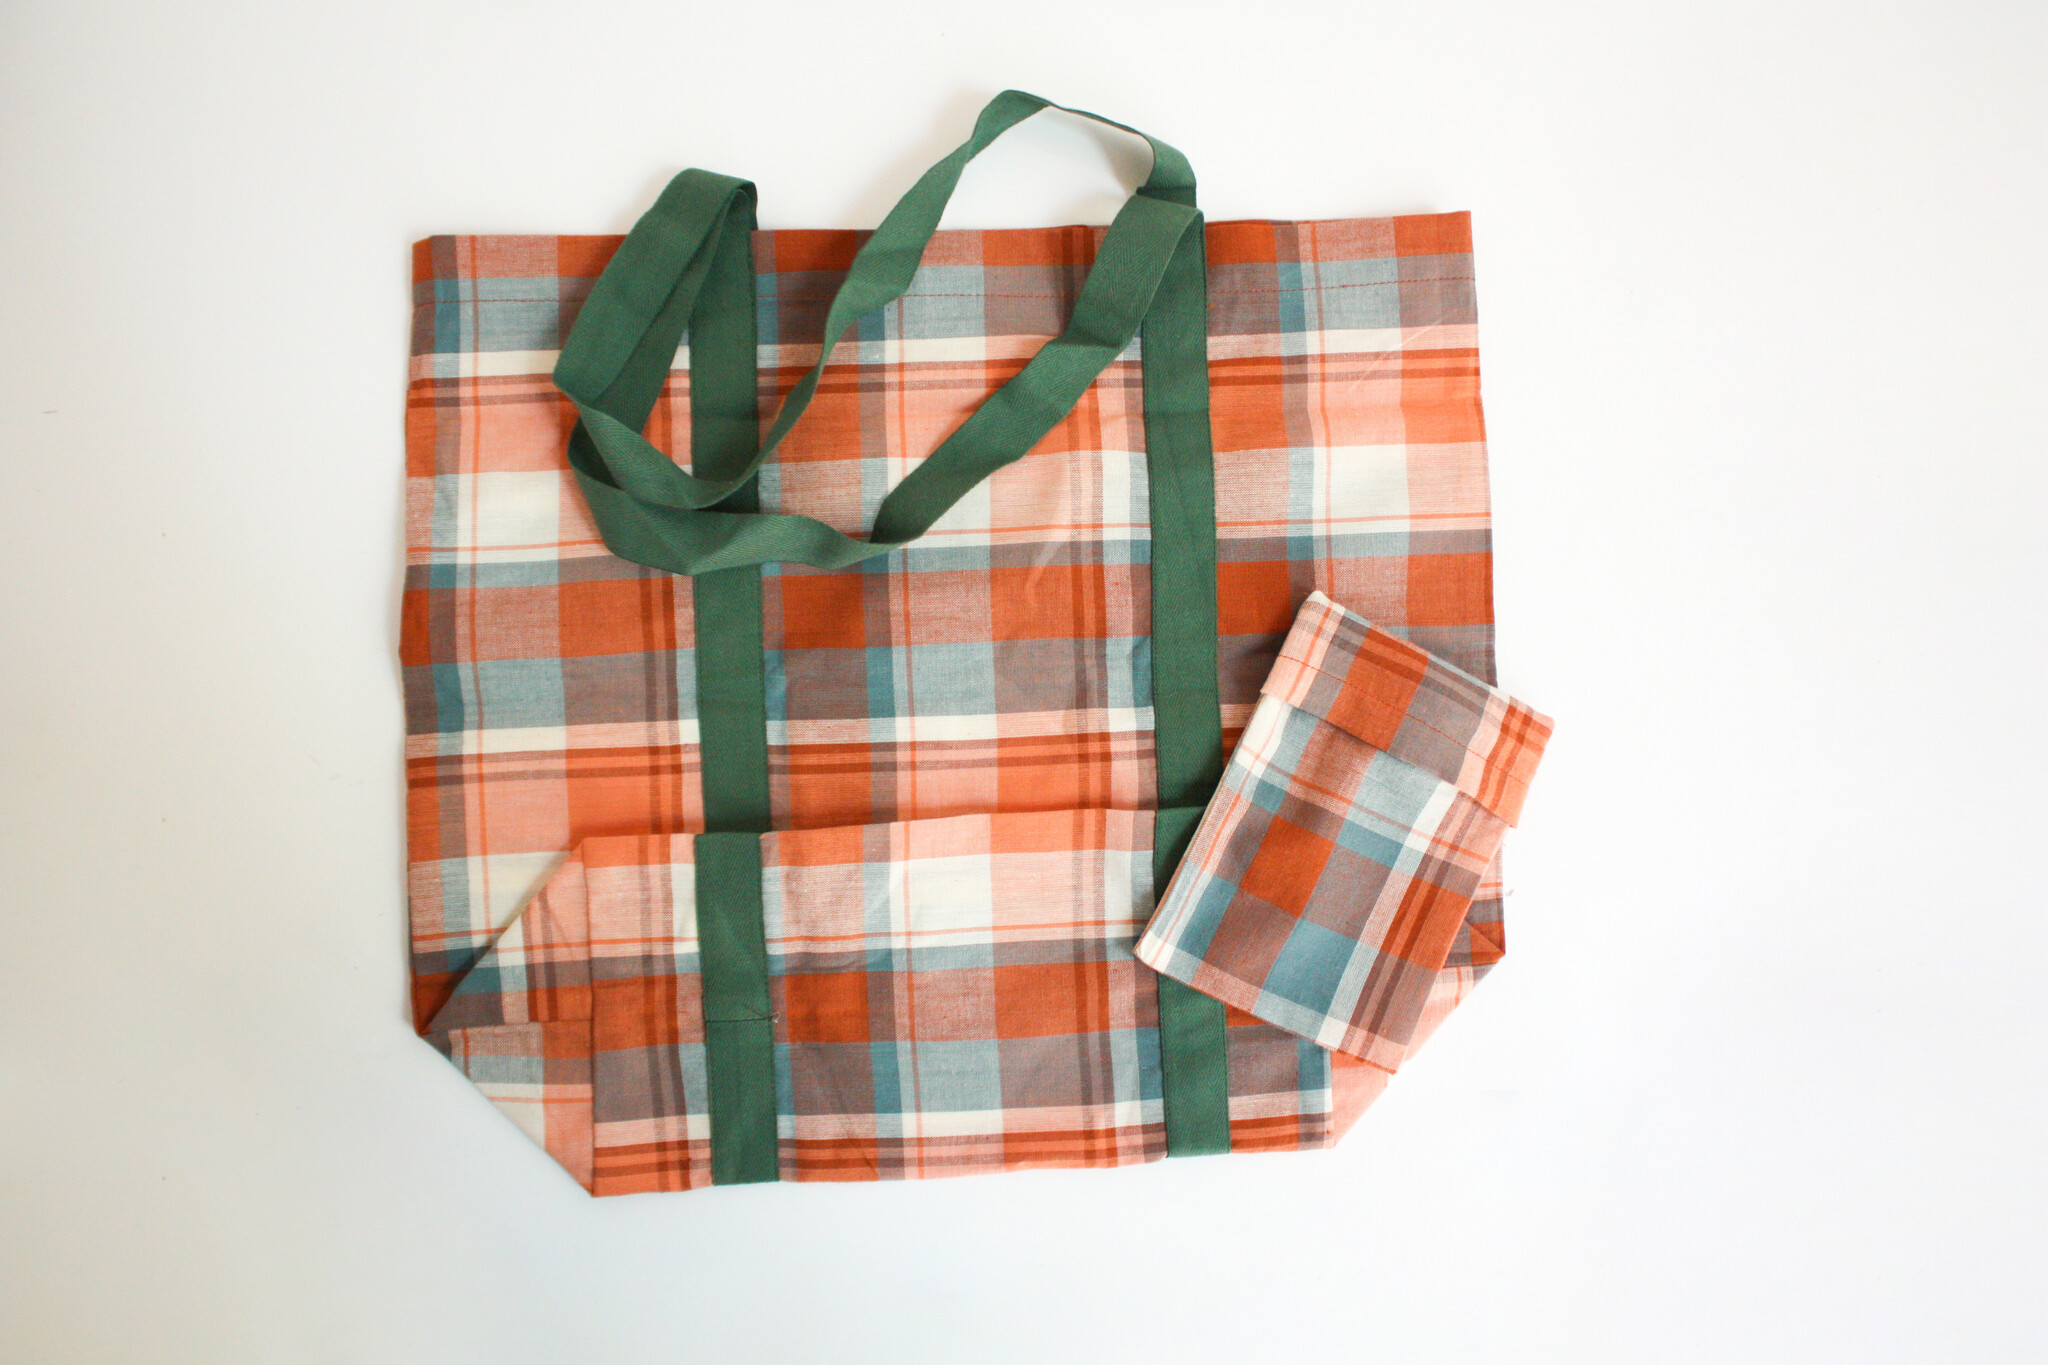 Chloe Costello Learn to Sew: Foldable Market Tote, Wednesday, June 5th, 5:30pm-8:30pm